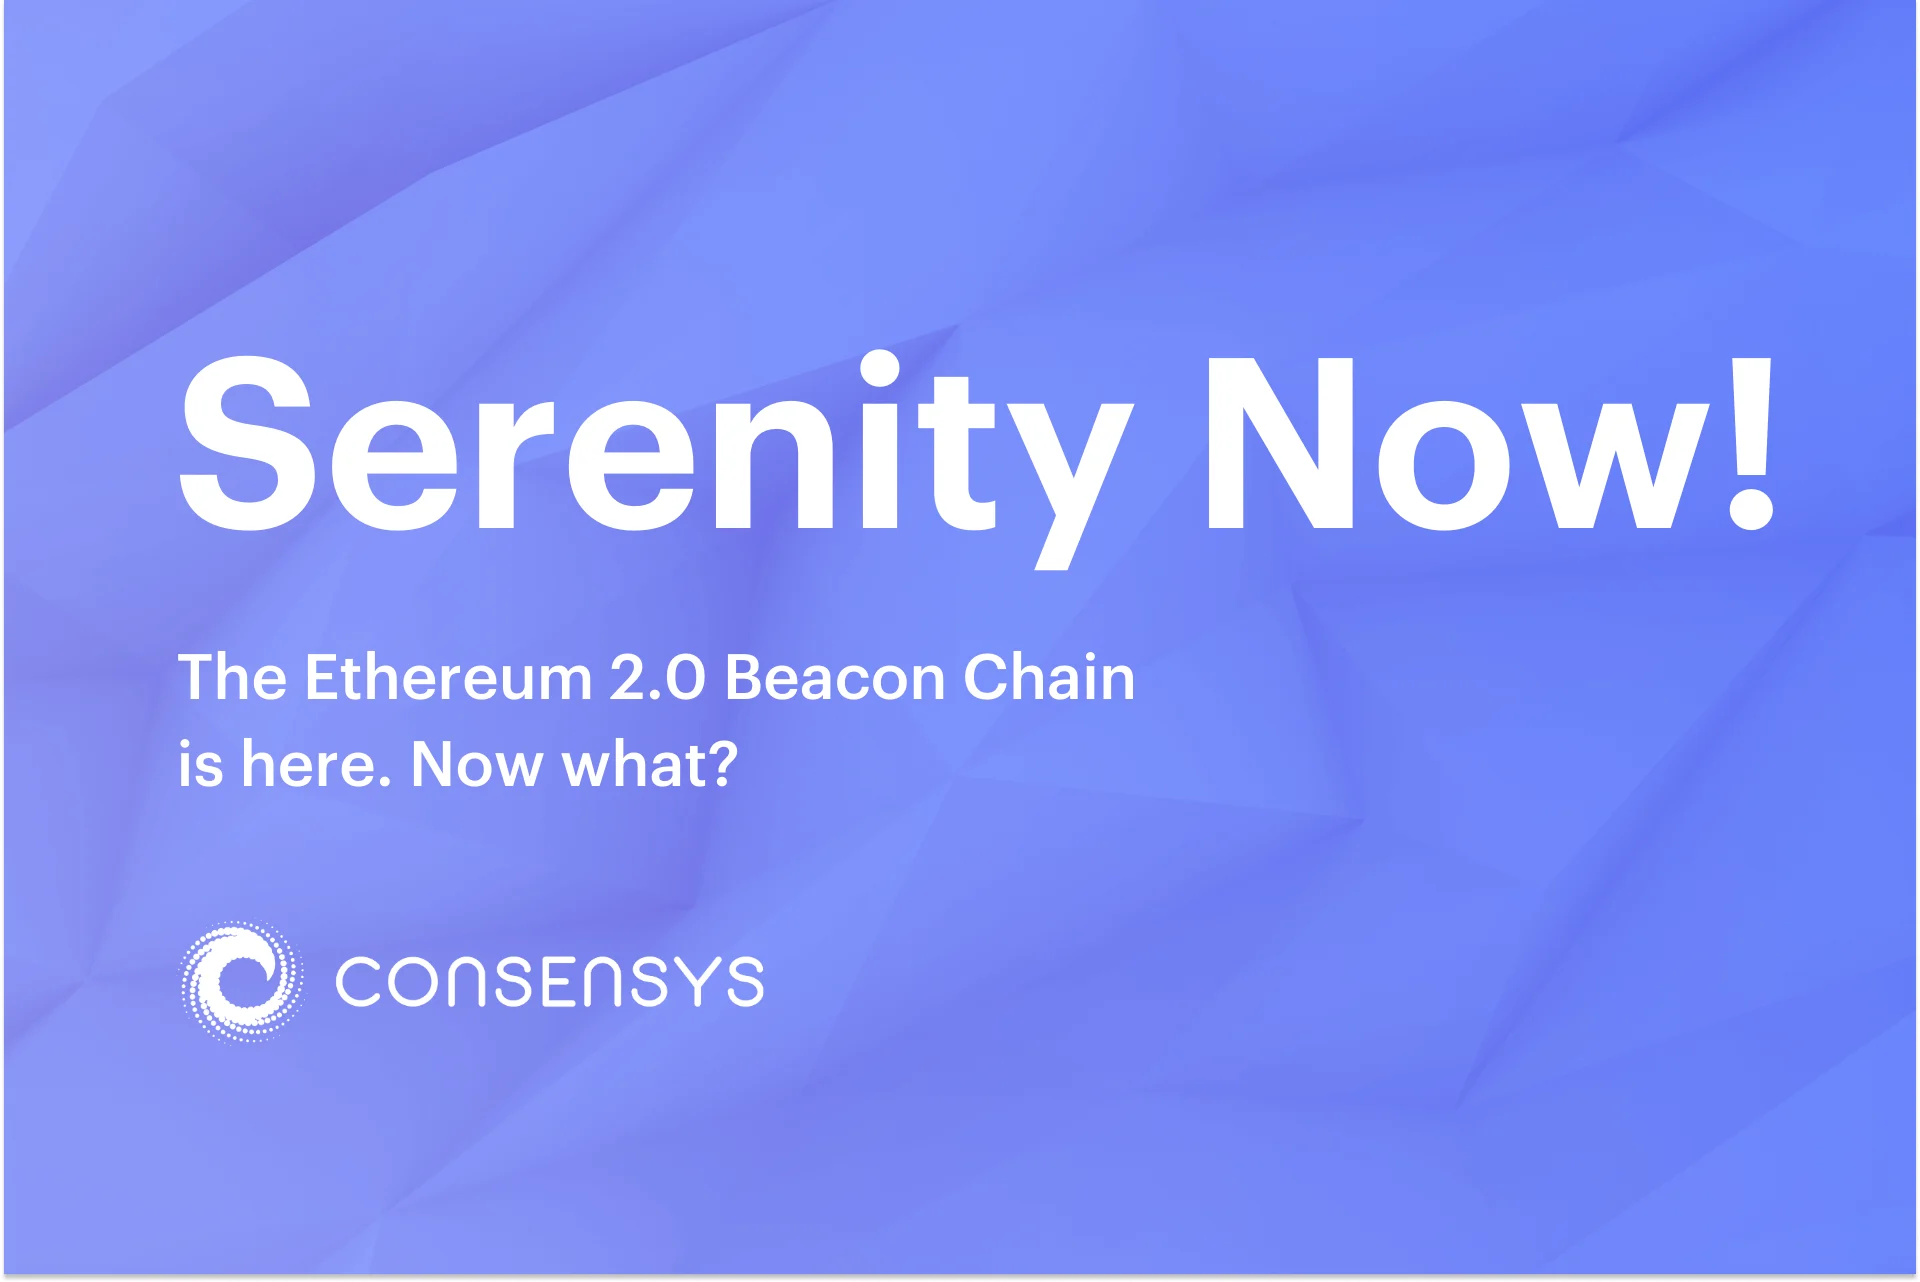 Image: The Ethereum 2.0 Beacon Chain is here. Now what?